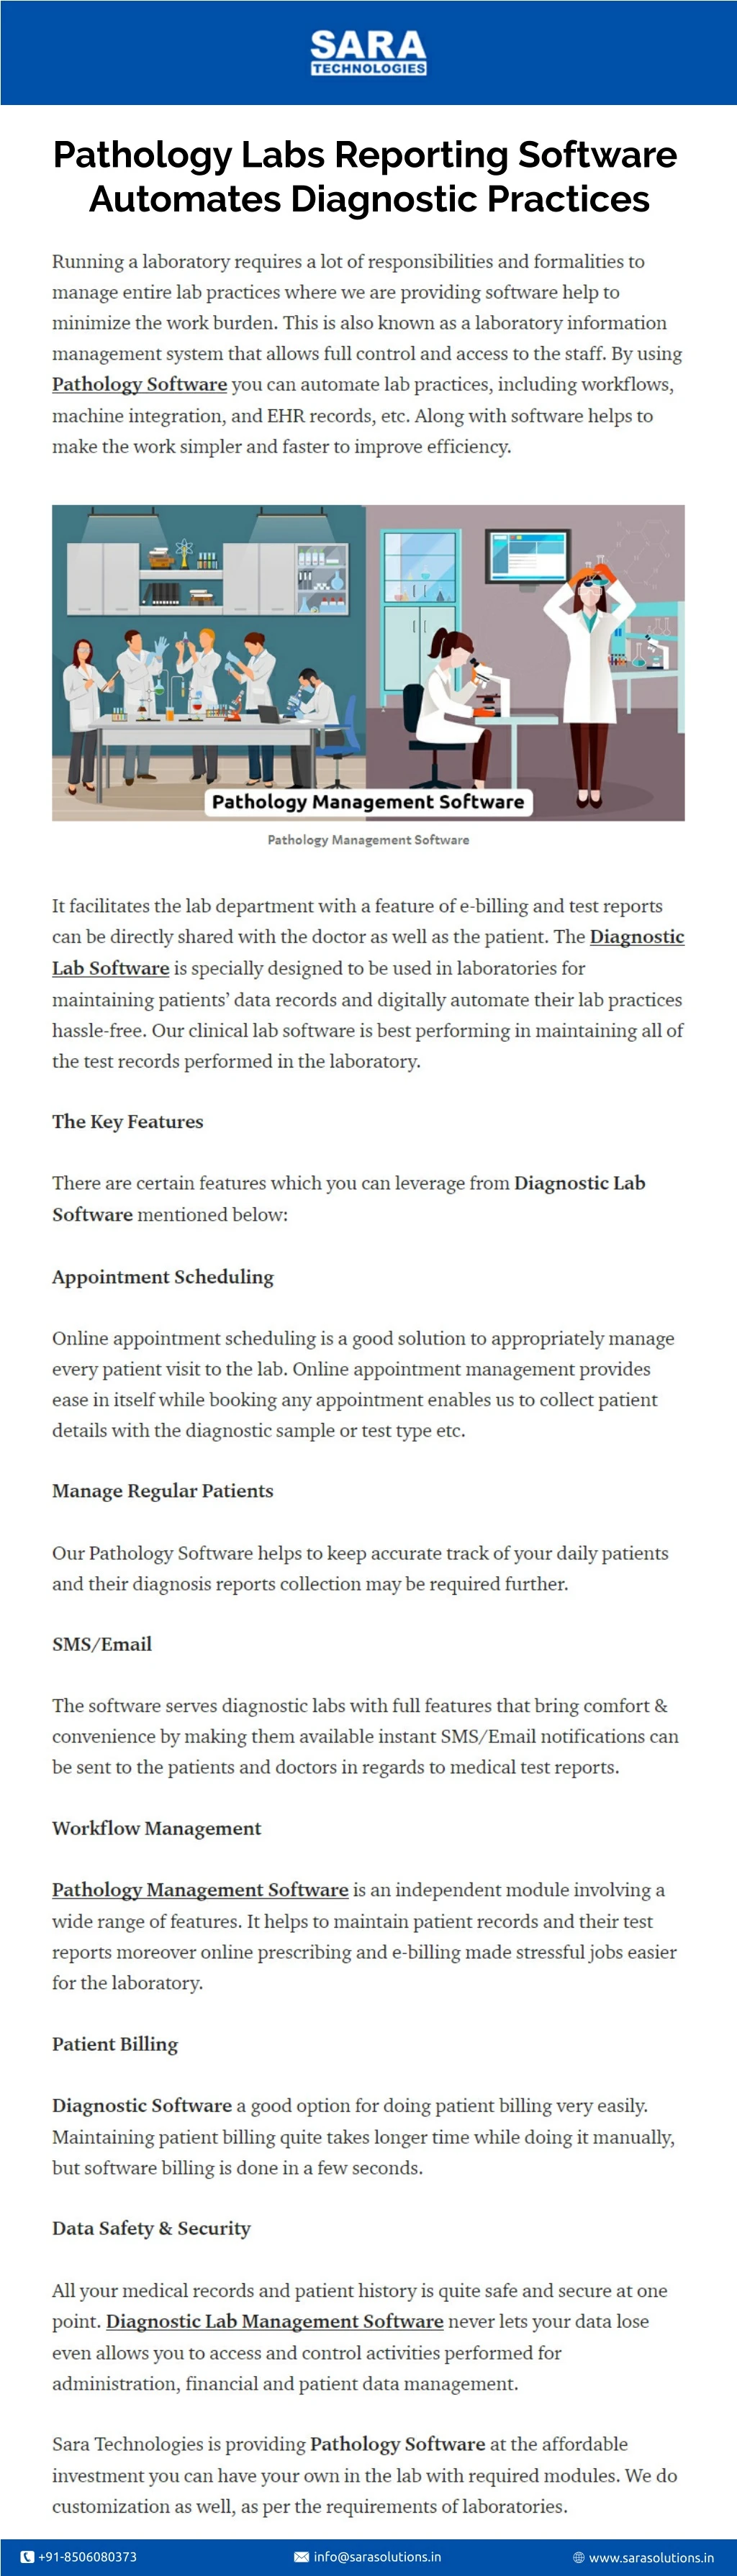 pathology labs reporting software automates